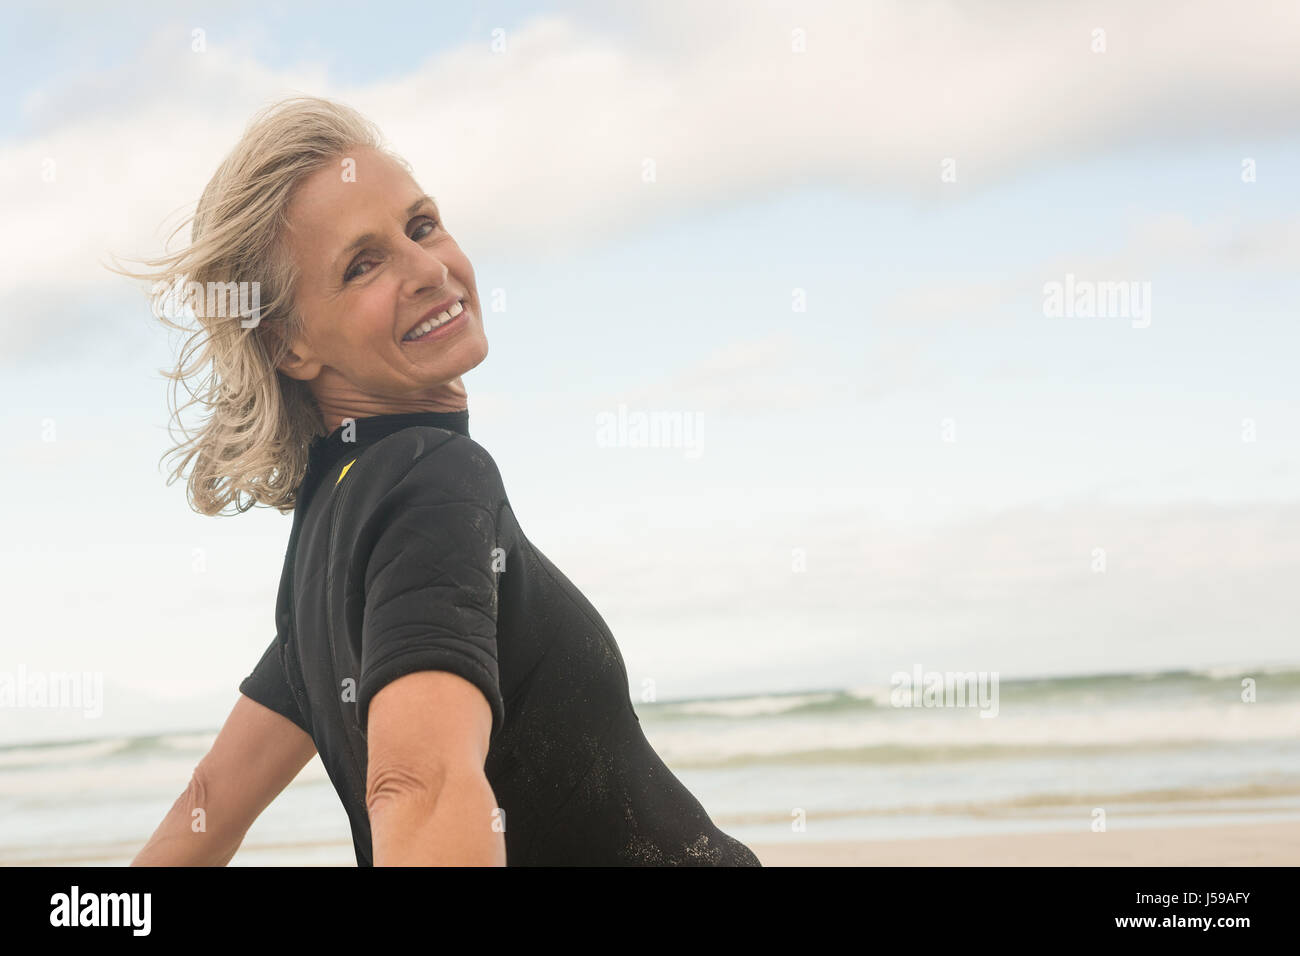 Portrait of smiling woman bending against cloudy sky Stock Photo